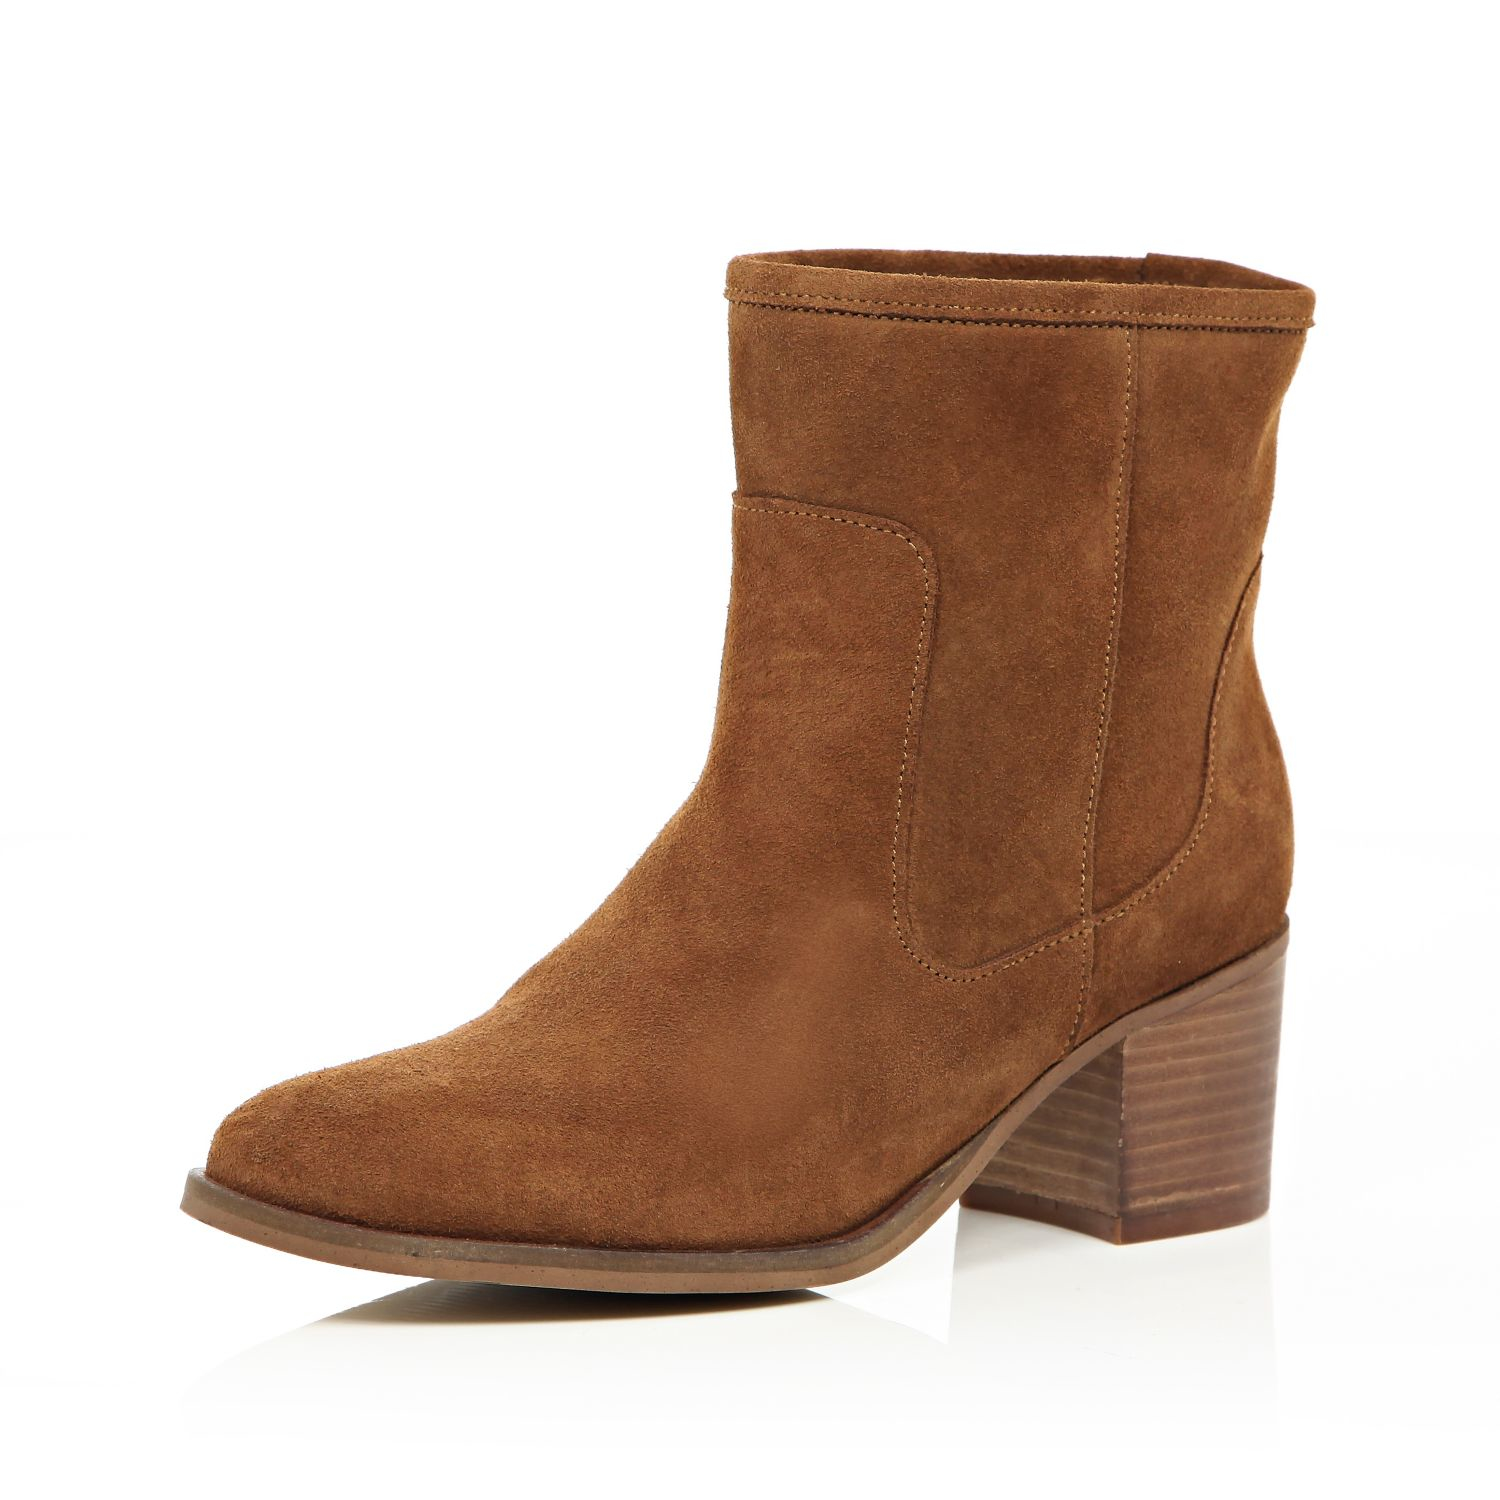 River island Tan Brown Suede Heeled Ankle Boots in Brown